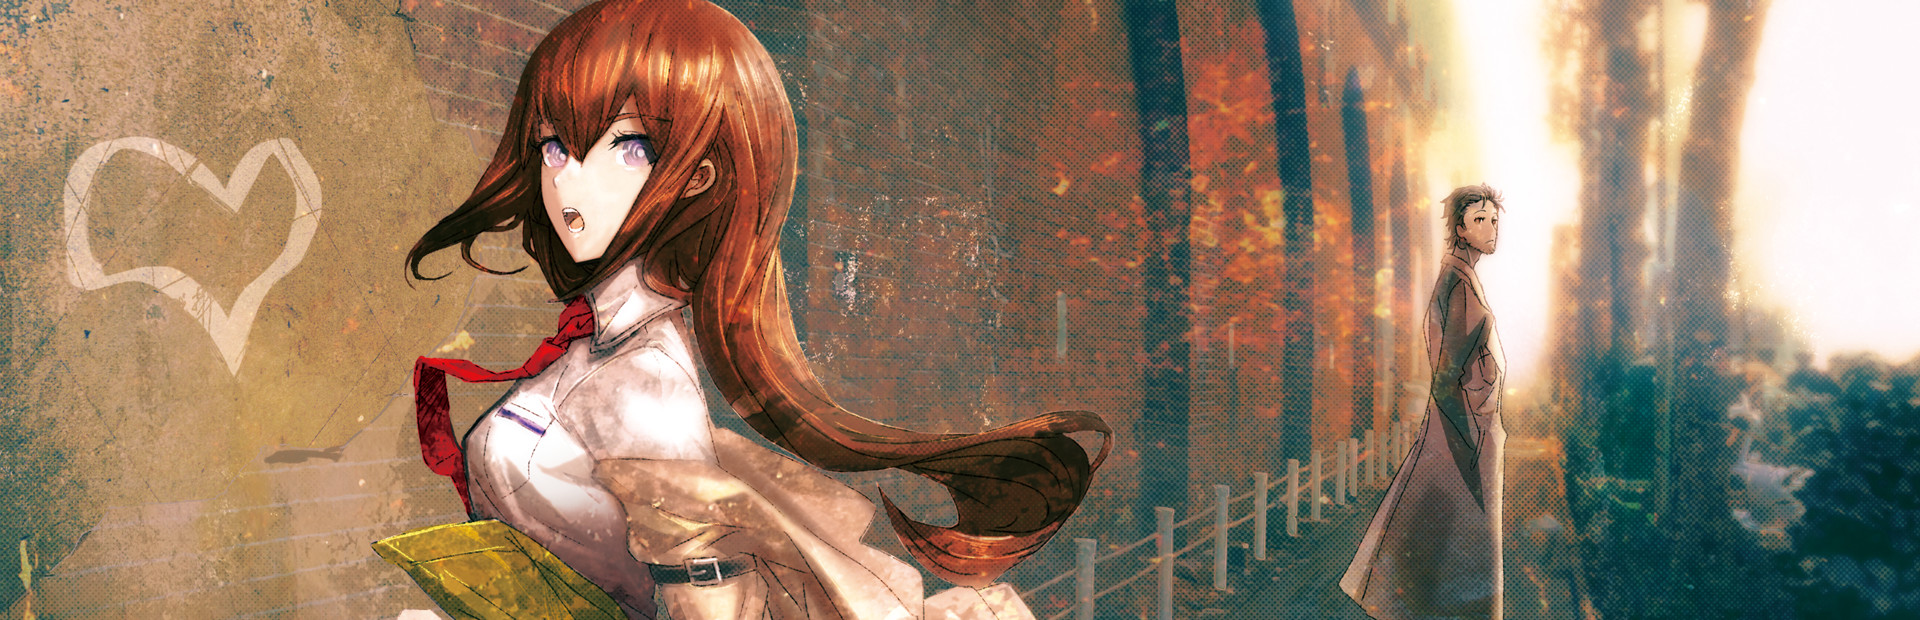 STEINS;GATE: My Darling's Embrace cover image